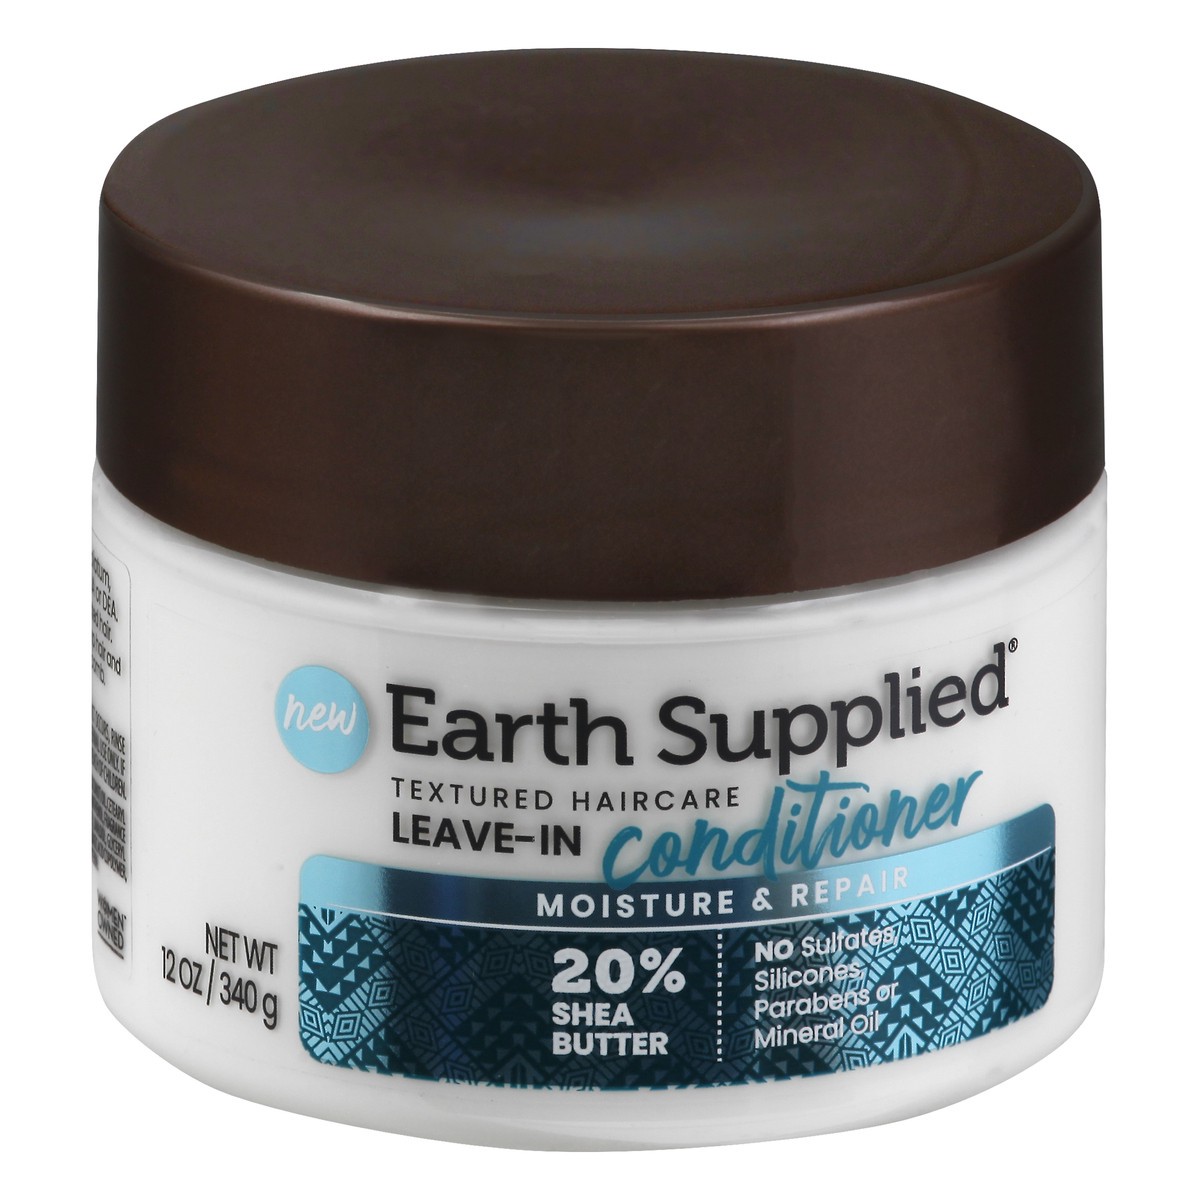 slide 2 of 9, Earth Supplied Leave-In Moisture & Repair Conditioner 12 oz, 12 oz